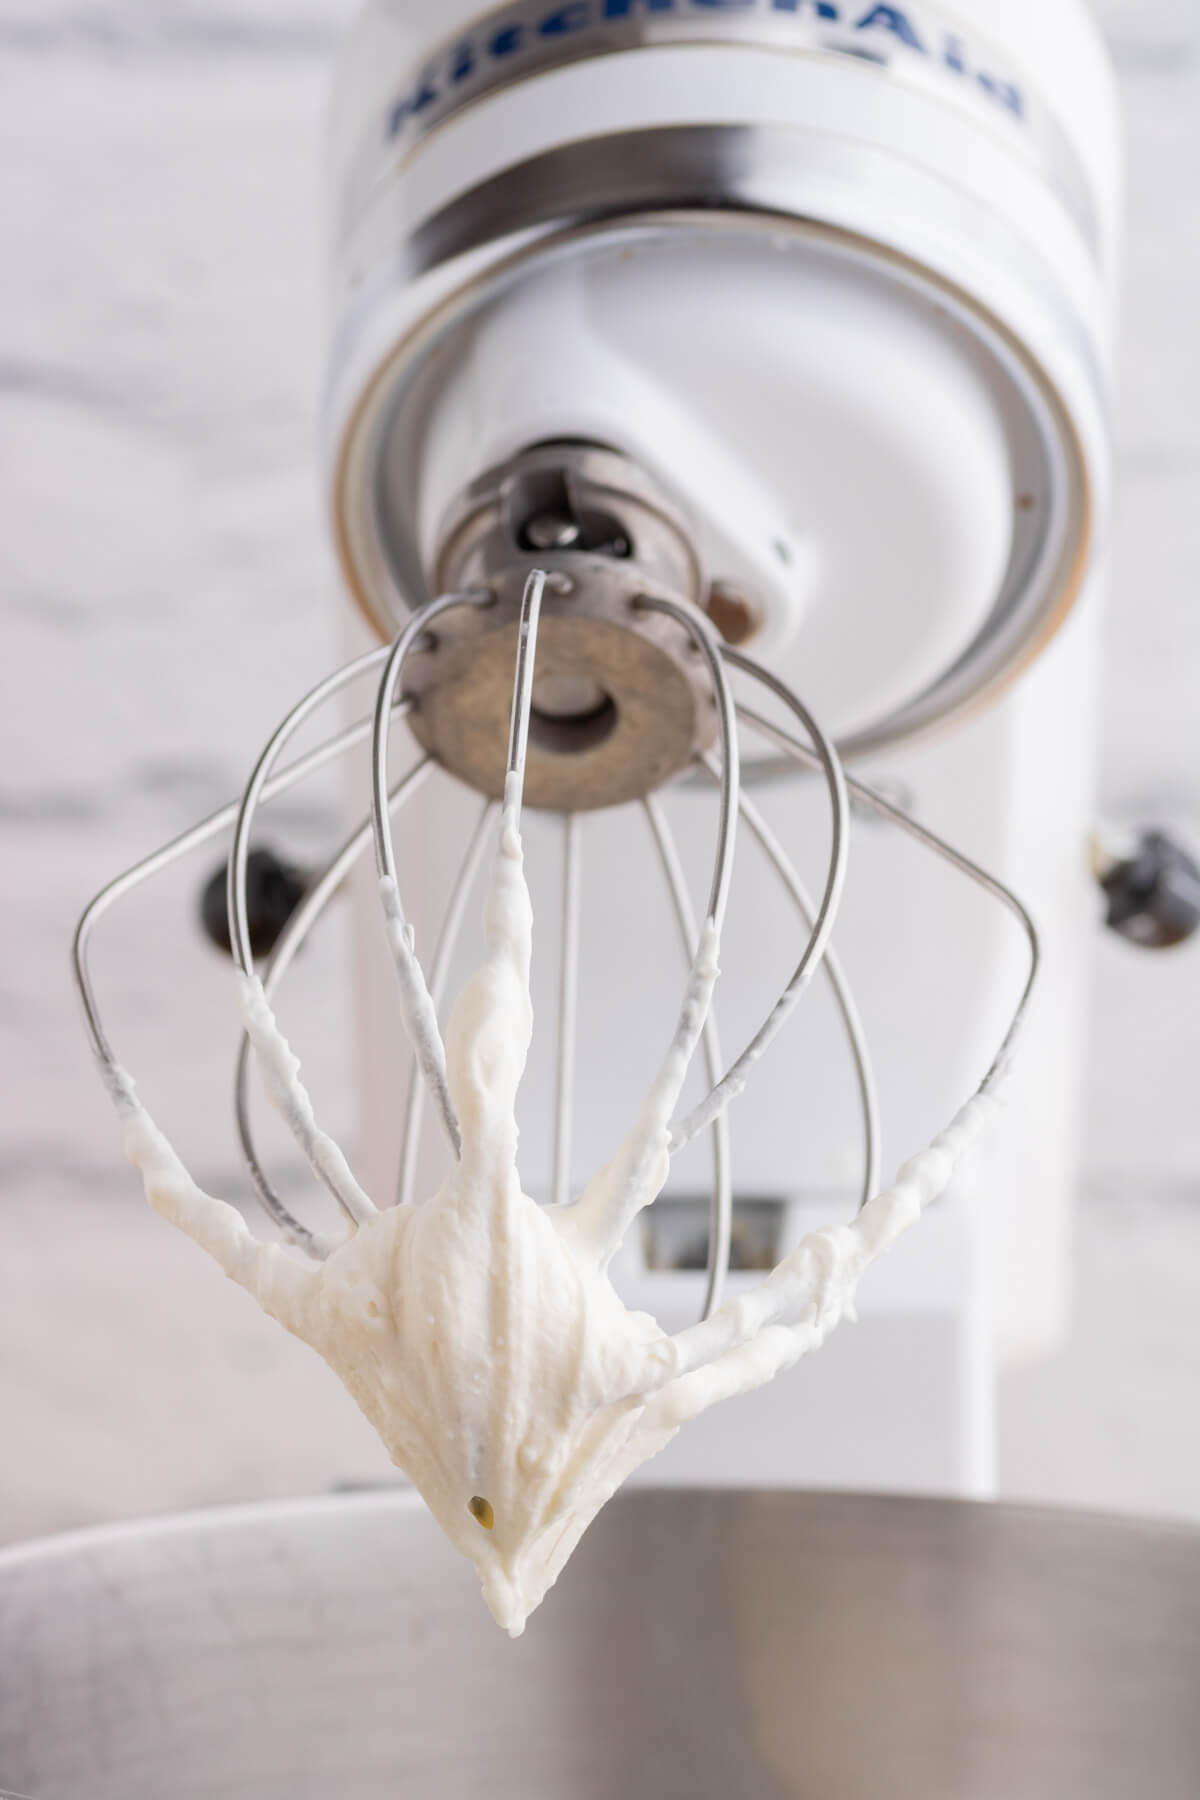 Whipped Mascarpone cream on the beater of a Kitchen Aid stand mixer.